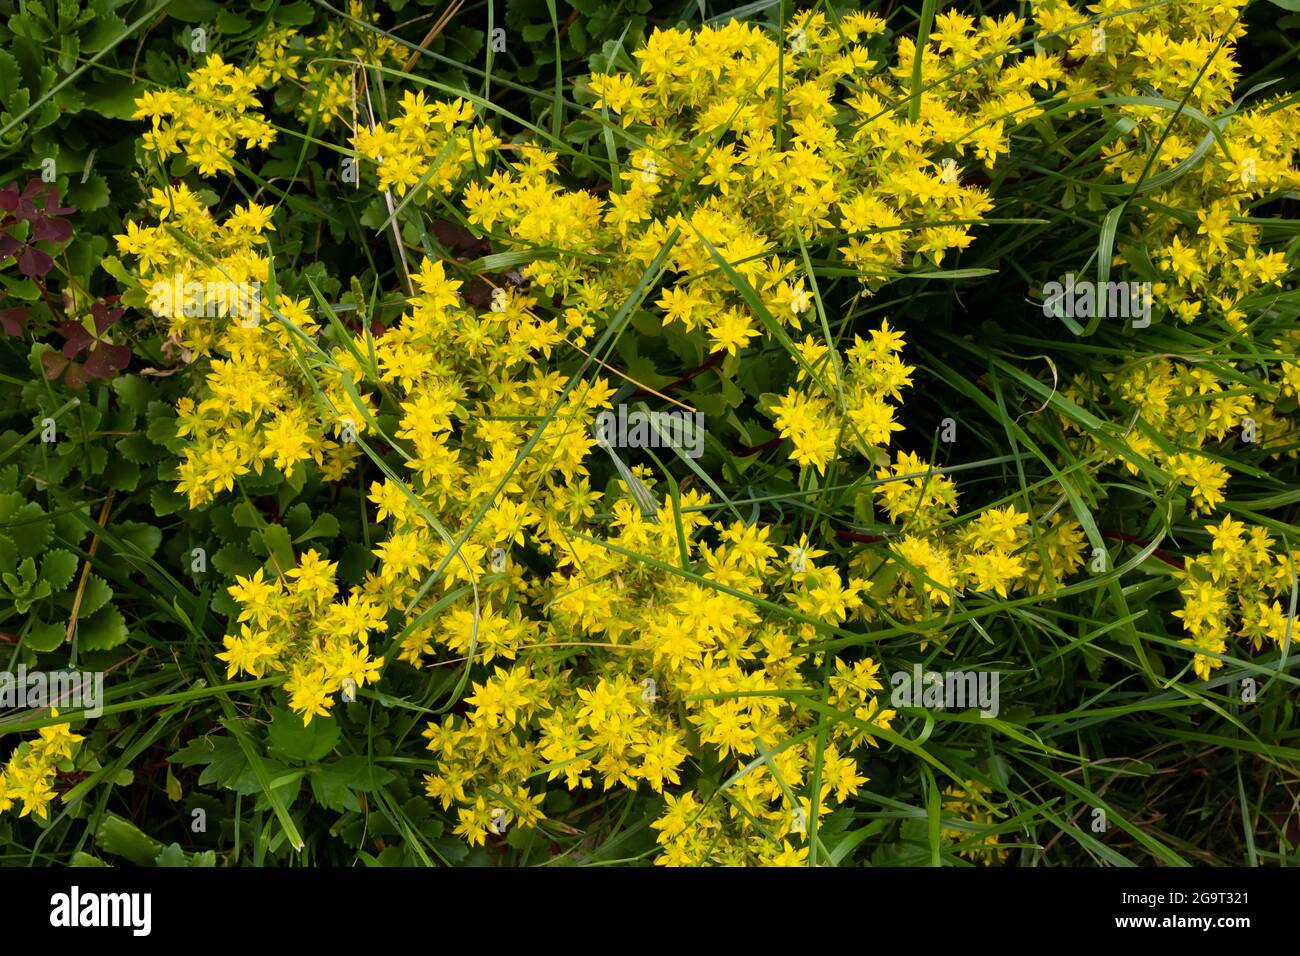 Sedum acre, commonly known as golden moss saxifrage, ochitok is a perennial flowering plant. Stock Photo